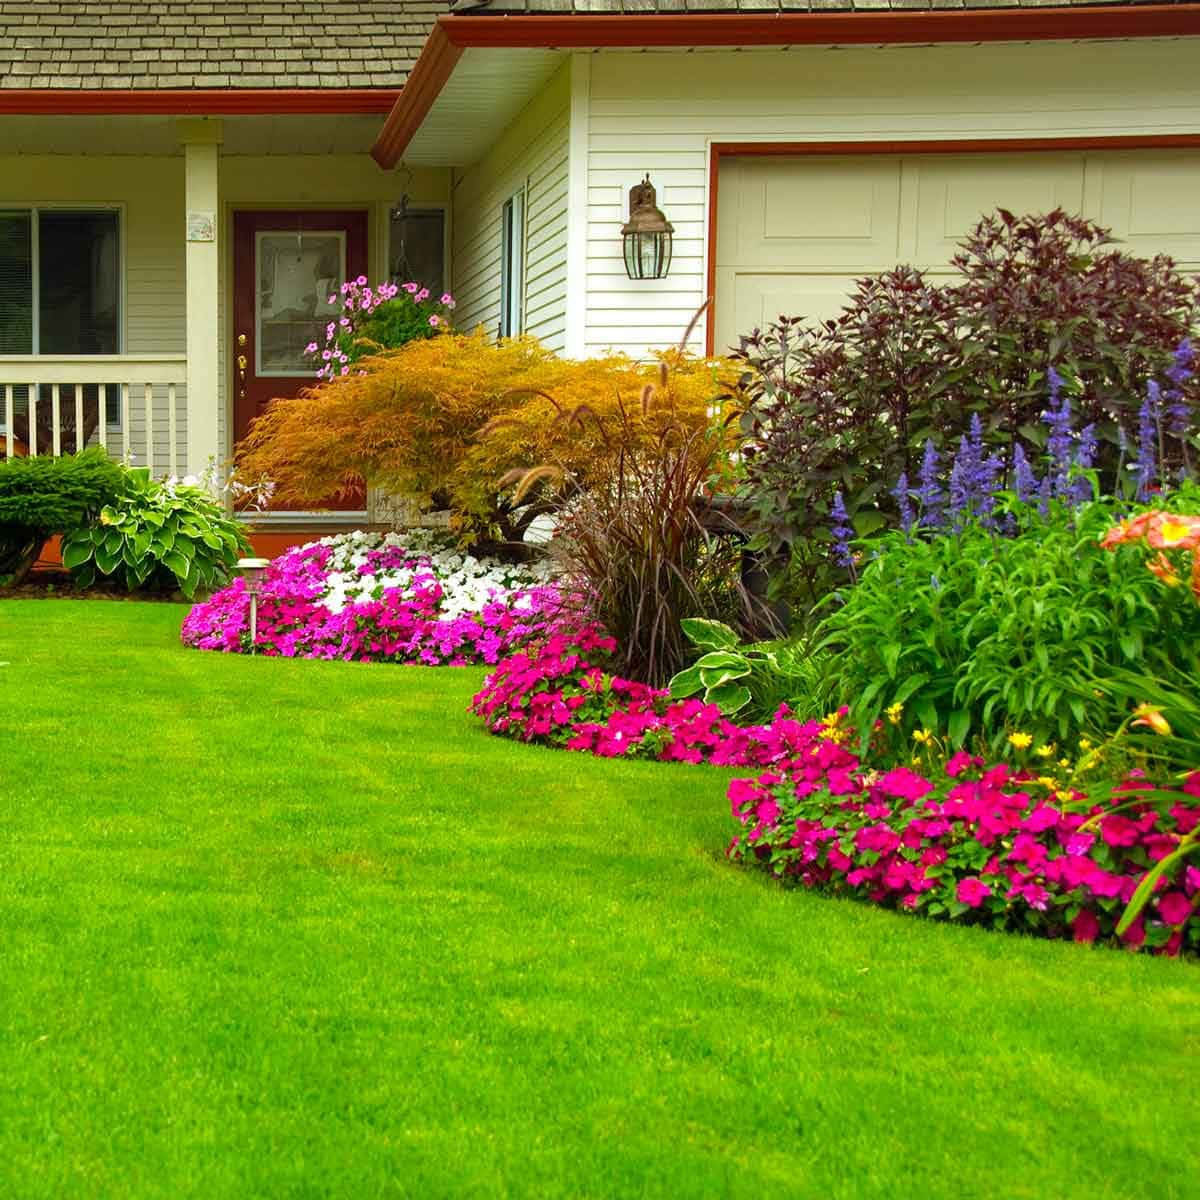 A House With A Lawn And Flowers In The Front Yard